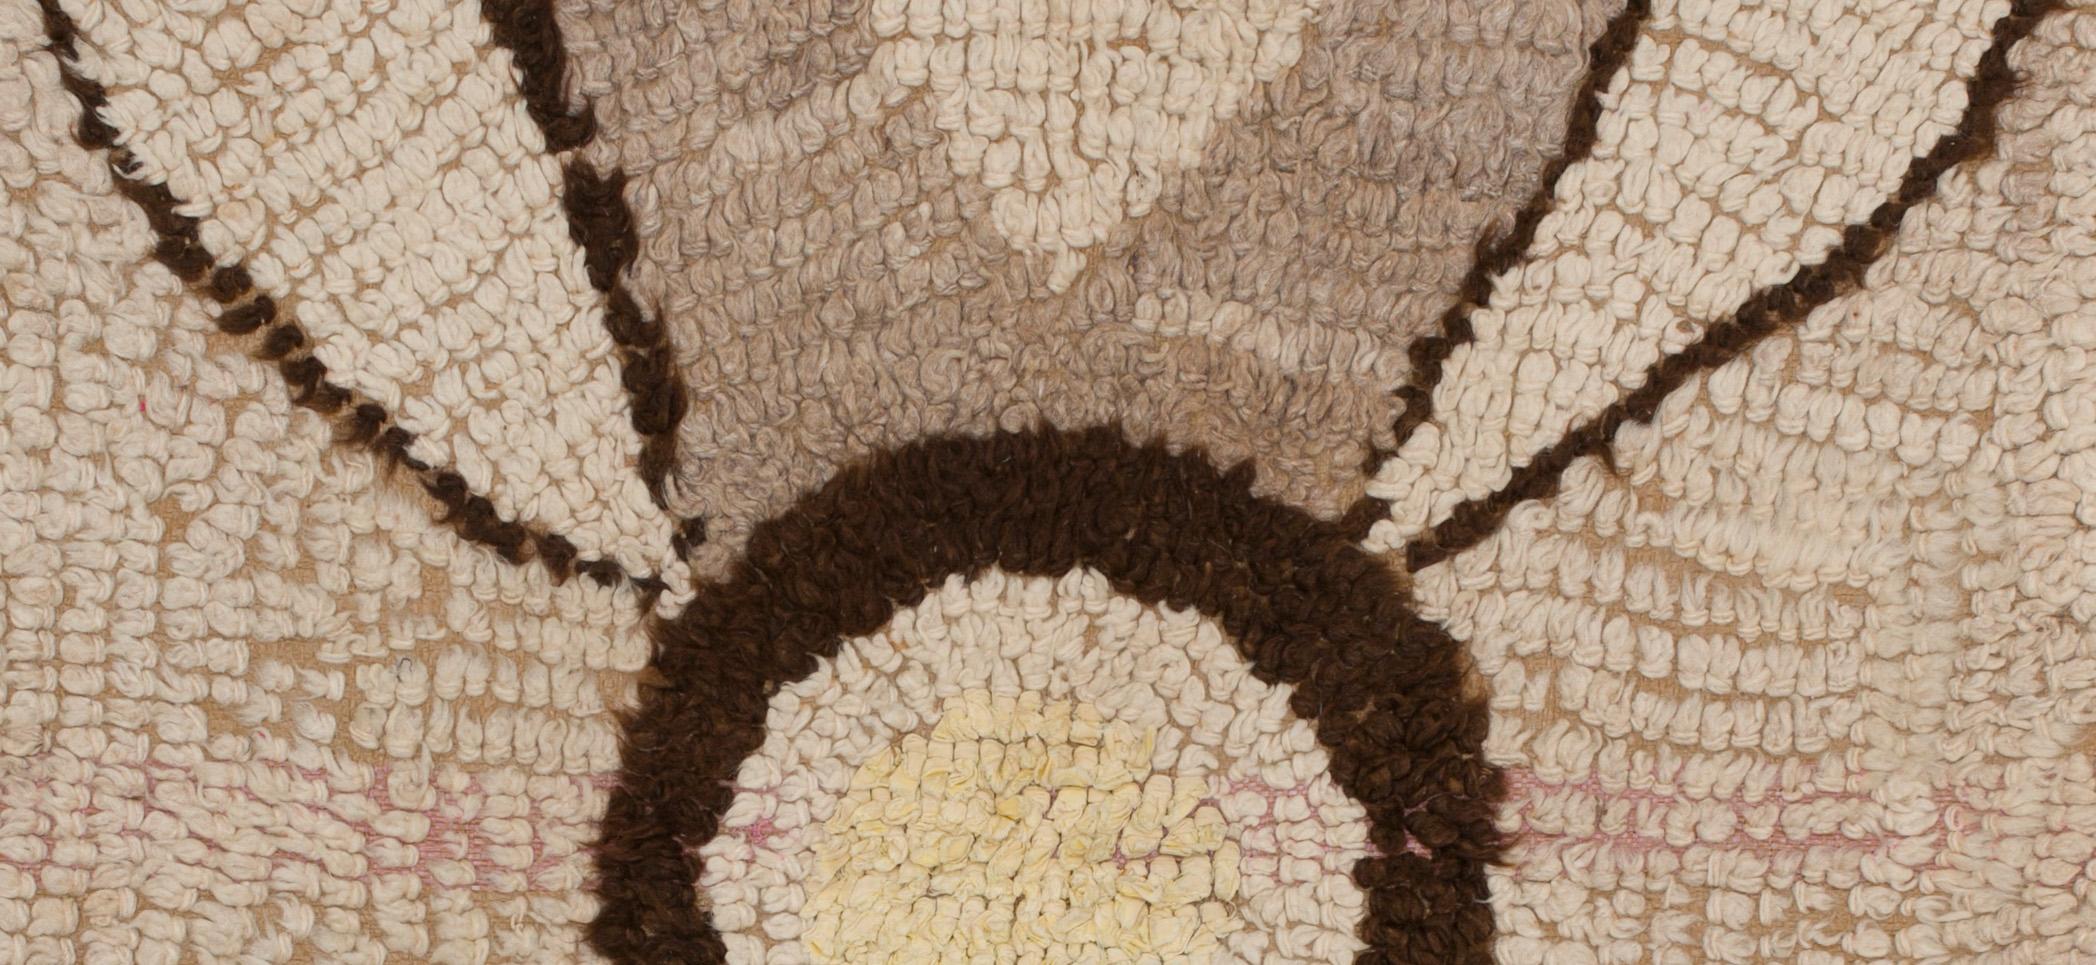 Amazing format for this tapestry made by Berber women from the Atlas Mountains.
Made from woolen ends and other threads, embroidered on wasted plastic bags of cereals, this unique and vintage work is the demonstration of the secret transmitted from